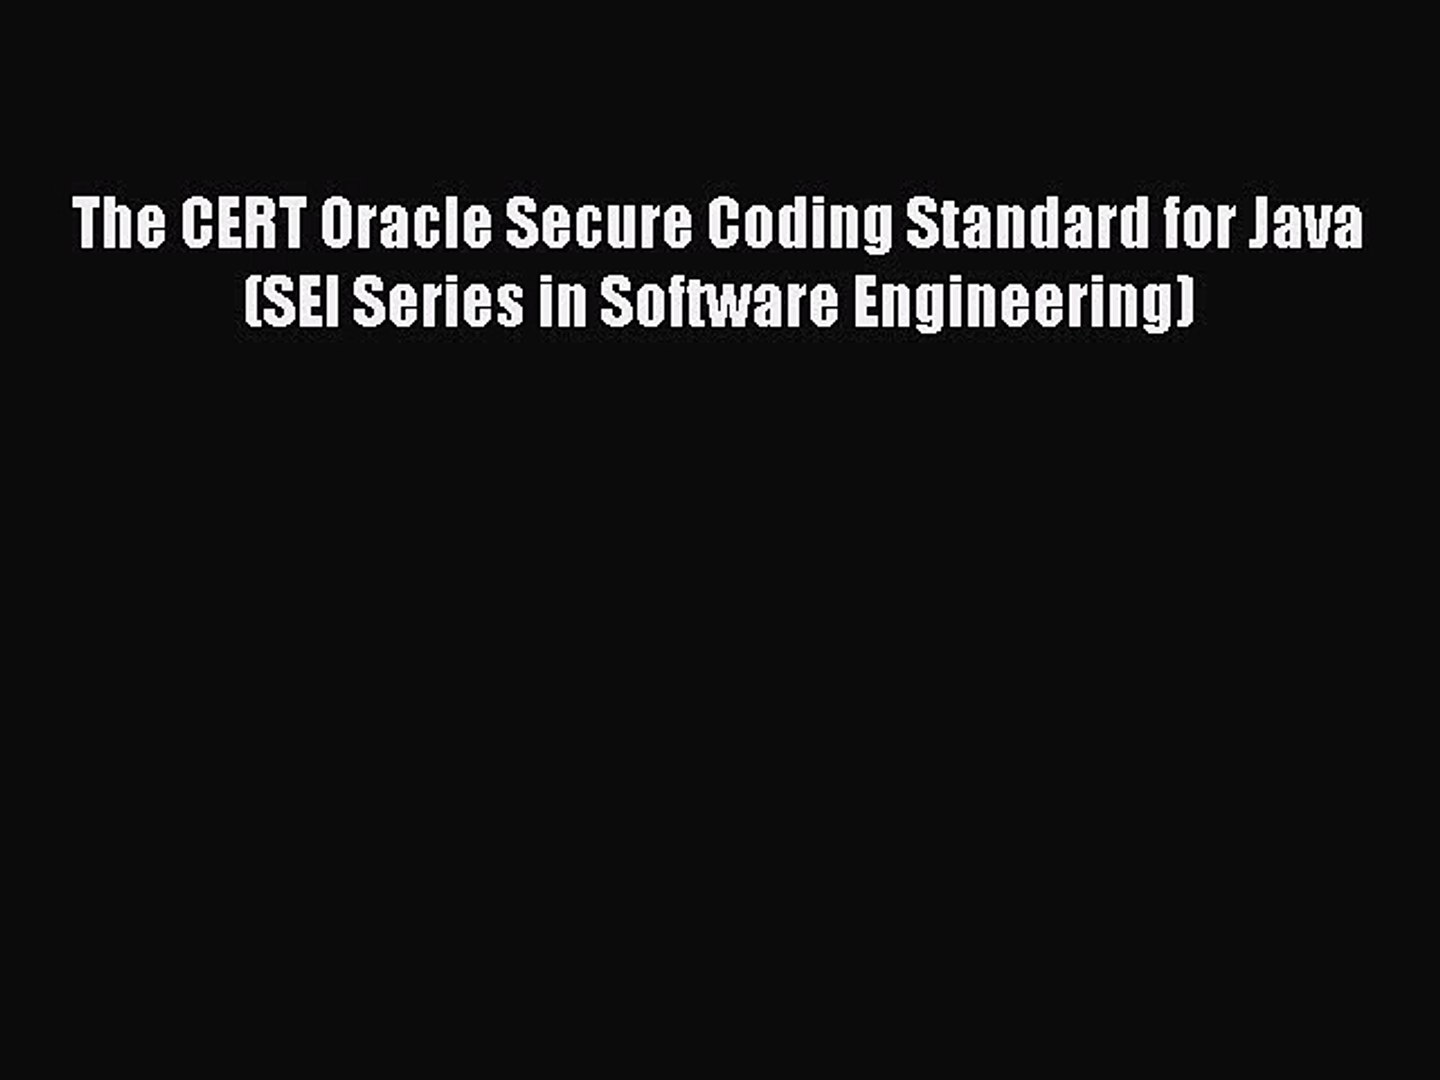 Read The CERT Oracle Secure Coding Standard for Java (SEI Series in Software Engineering) Ebook